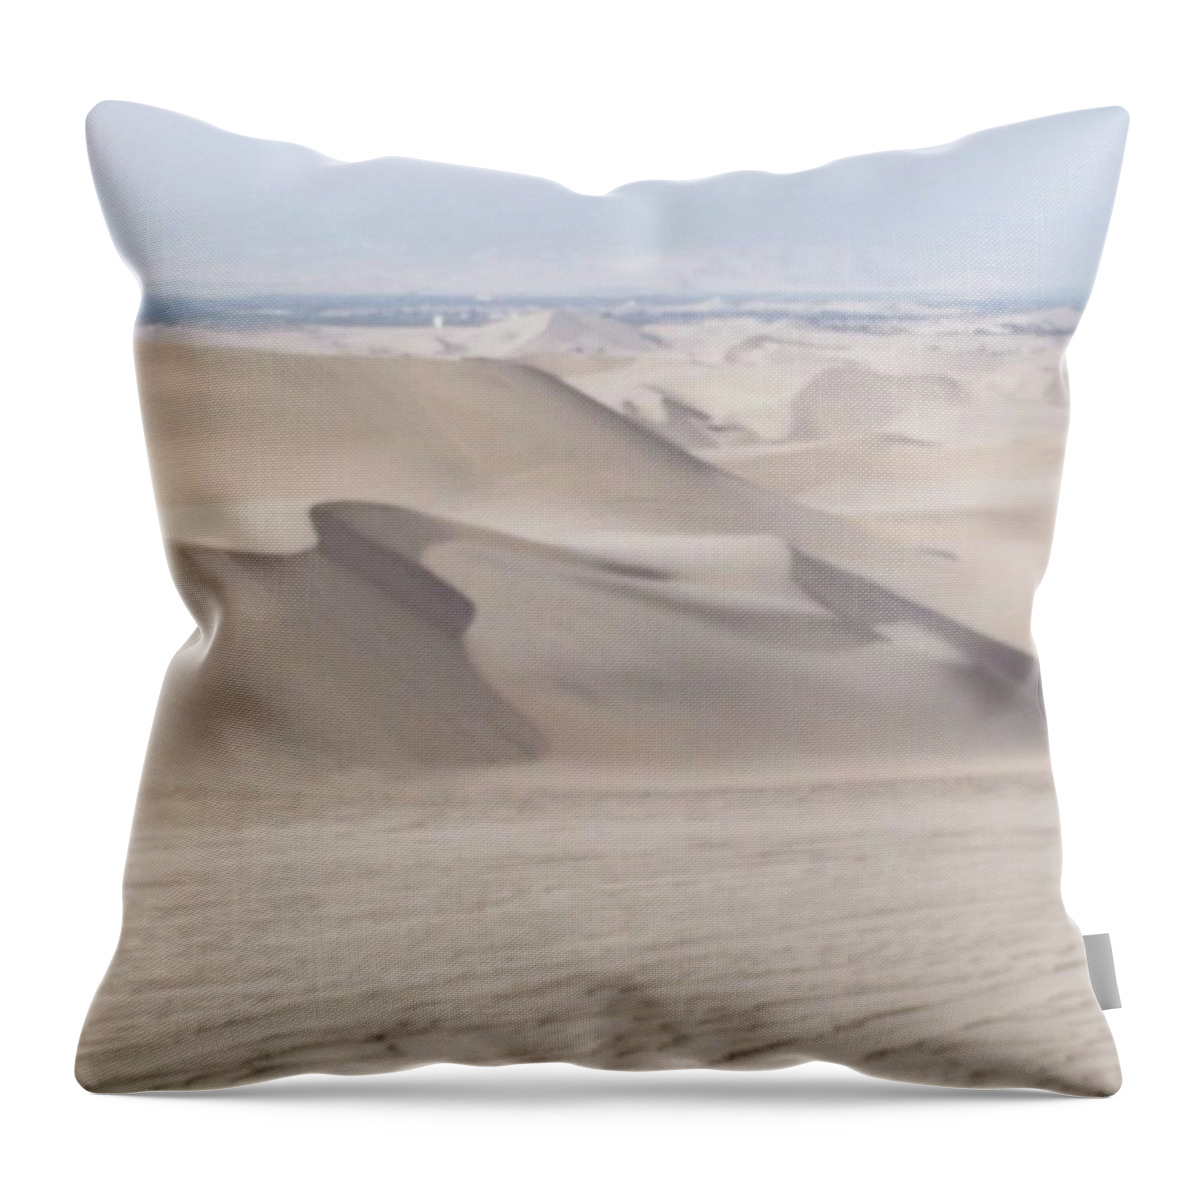 Volunteering Throw Pillow featuring the photograph Desert Dunes In Peru by Charlotte Cooper